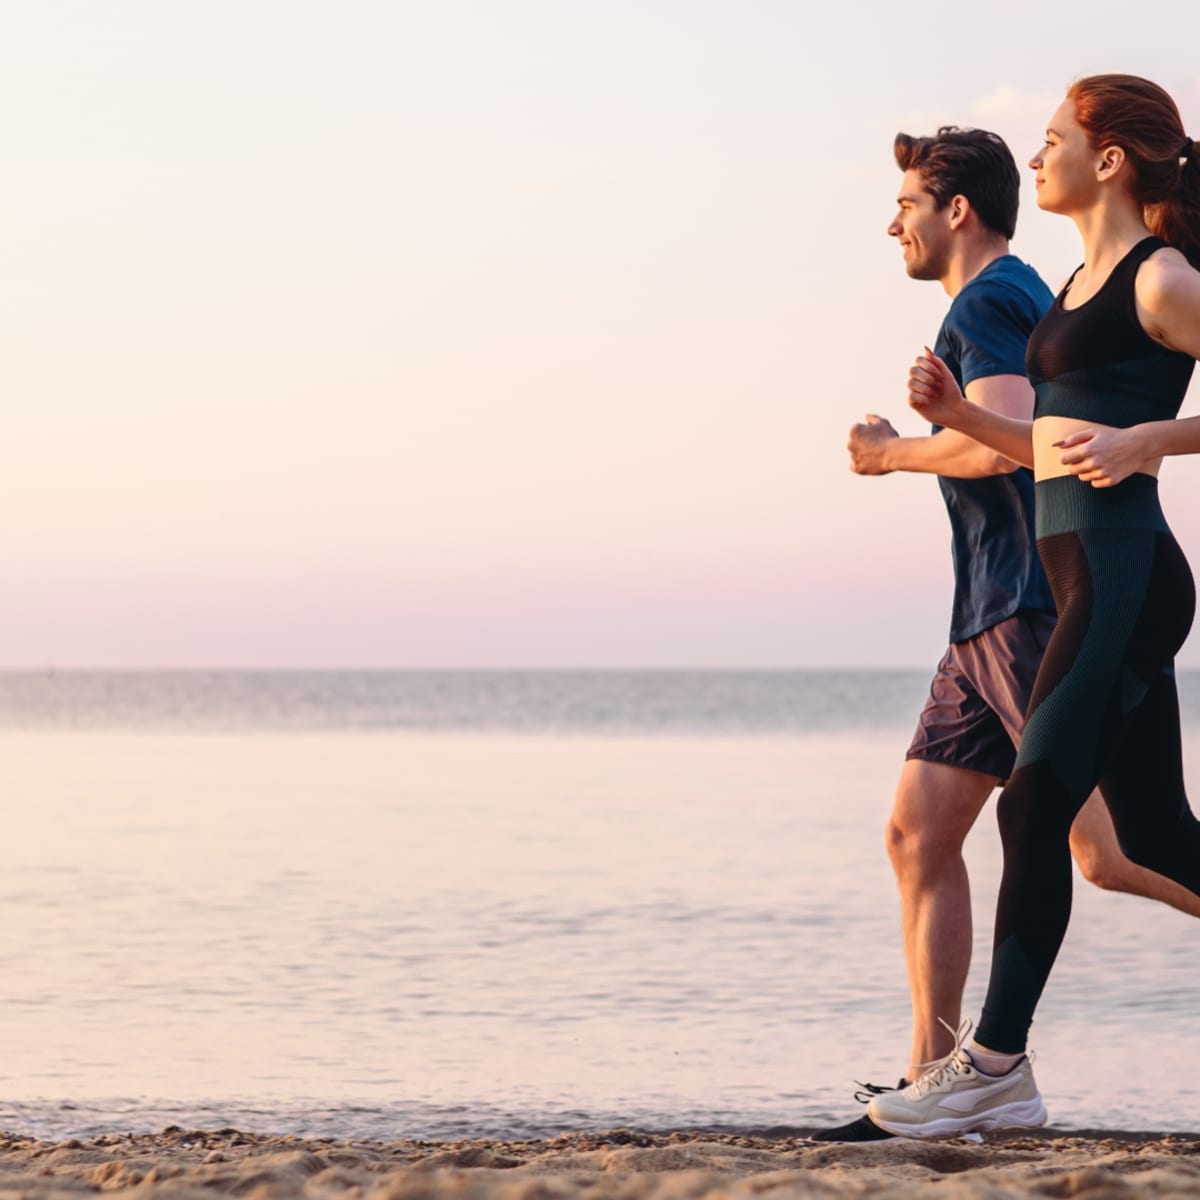 Green Exercise: How It Benefits You - IDEA Health & Fitness Association